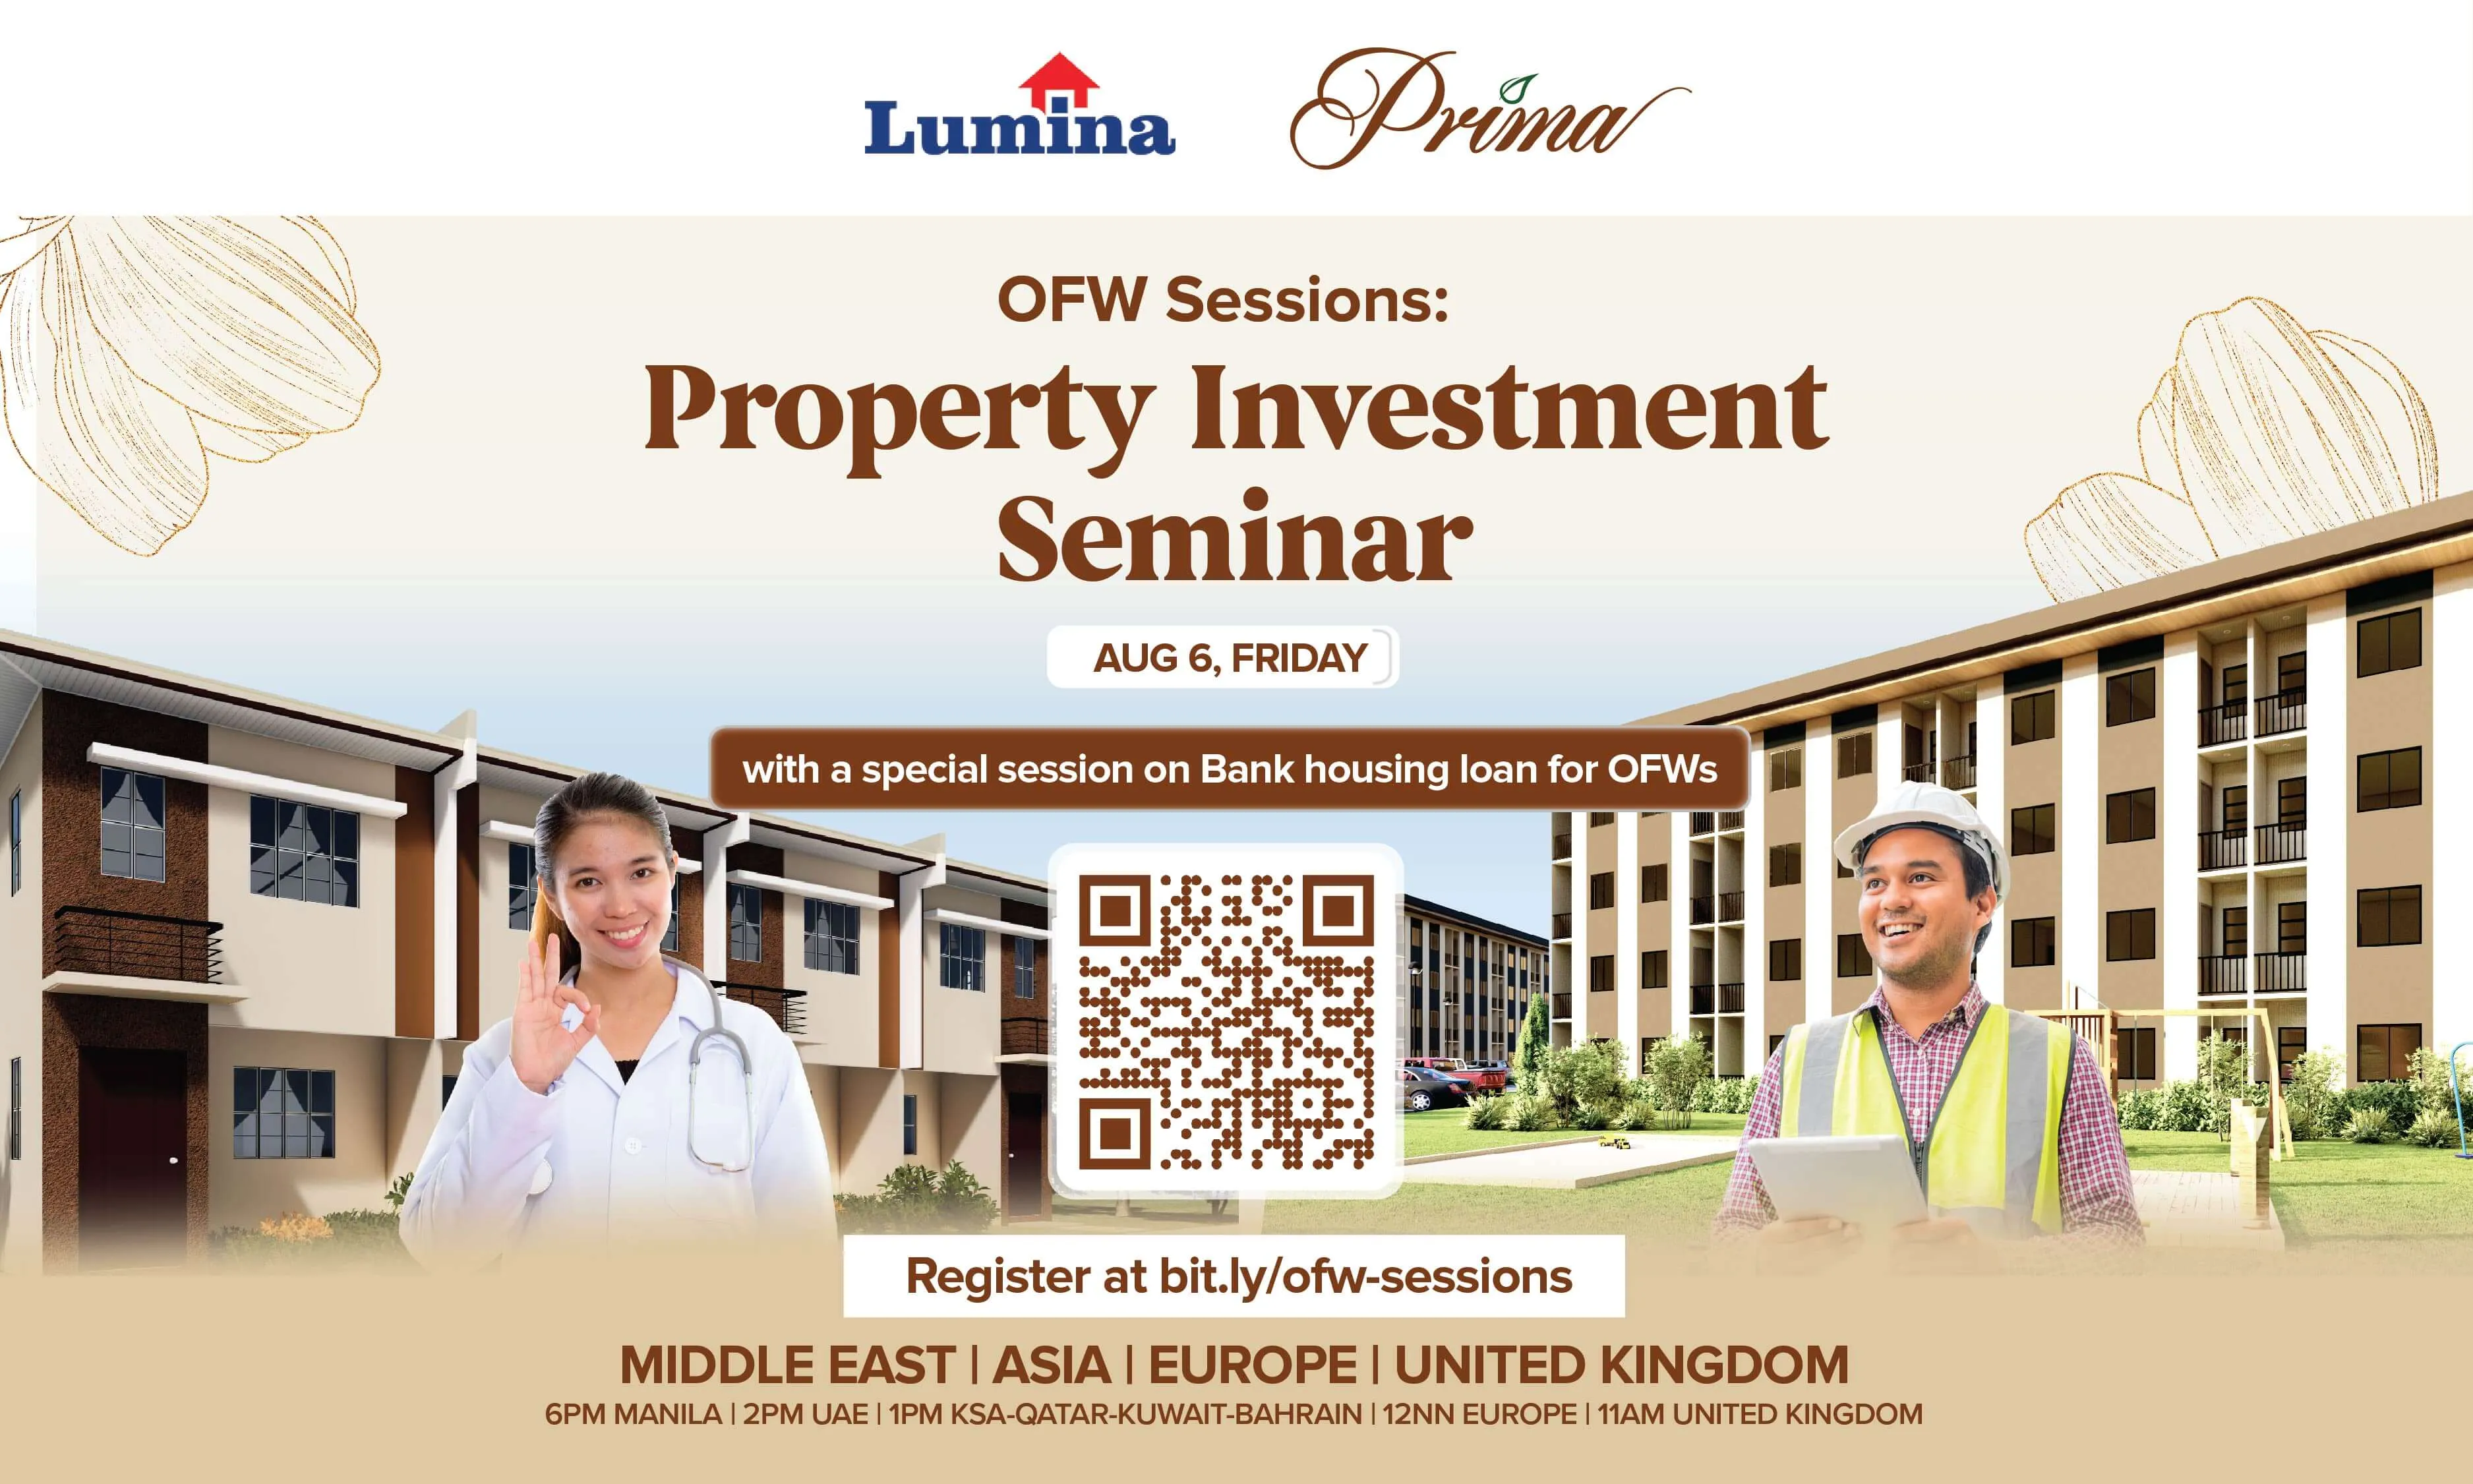 OFW Sessions Property Investment Seminar this Aug 6